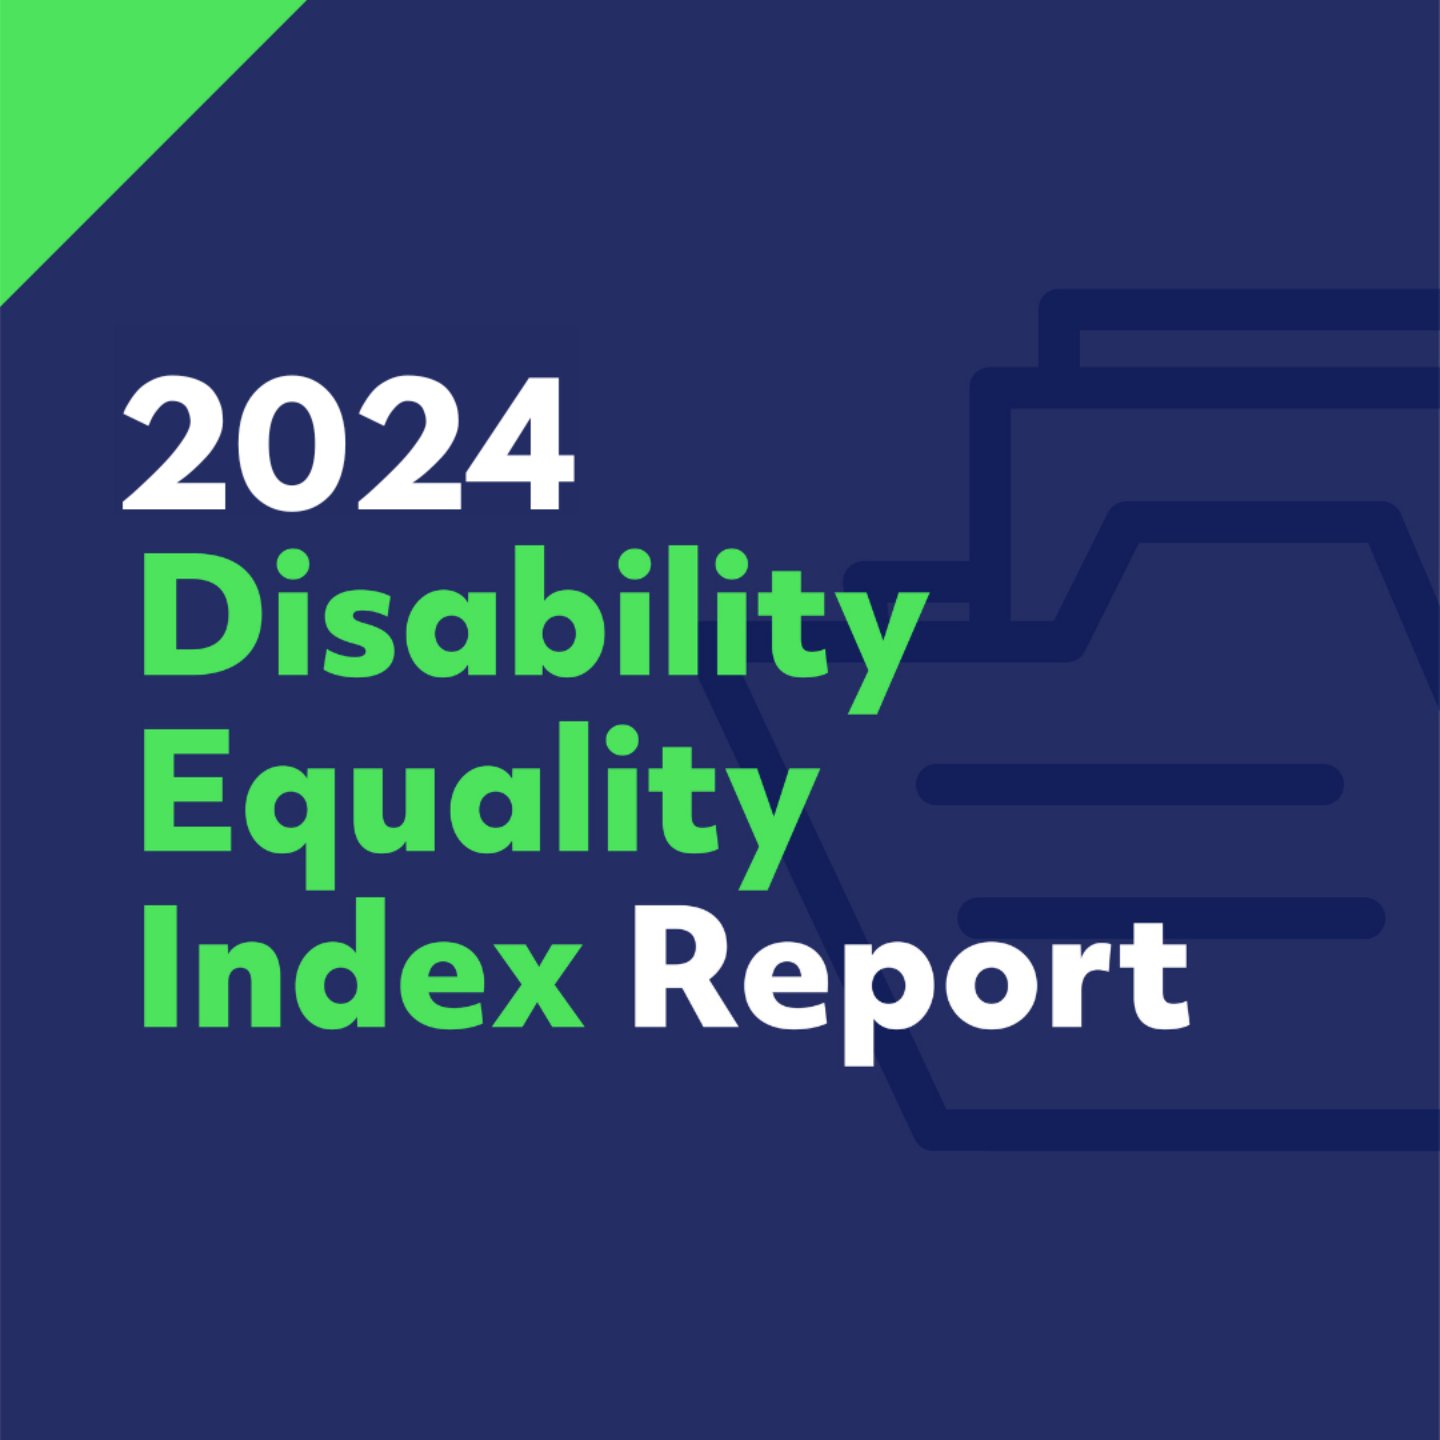 2024 Disability Equality Index Report